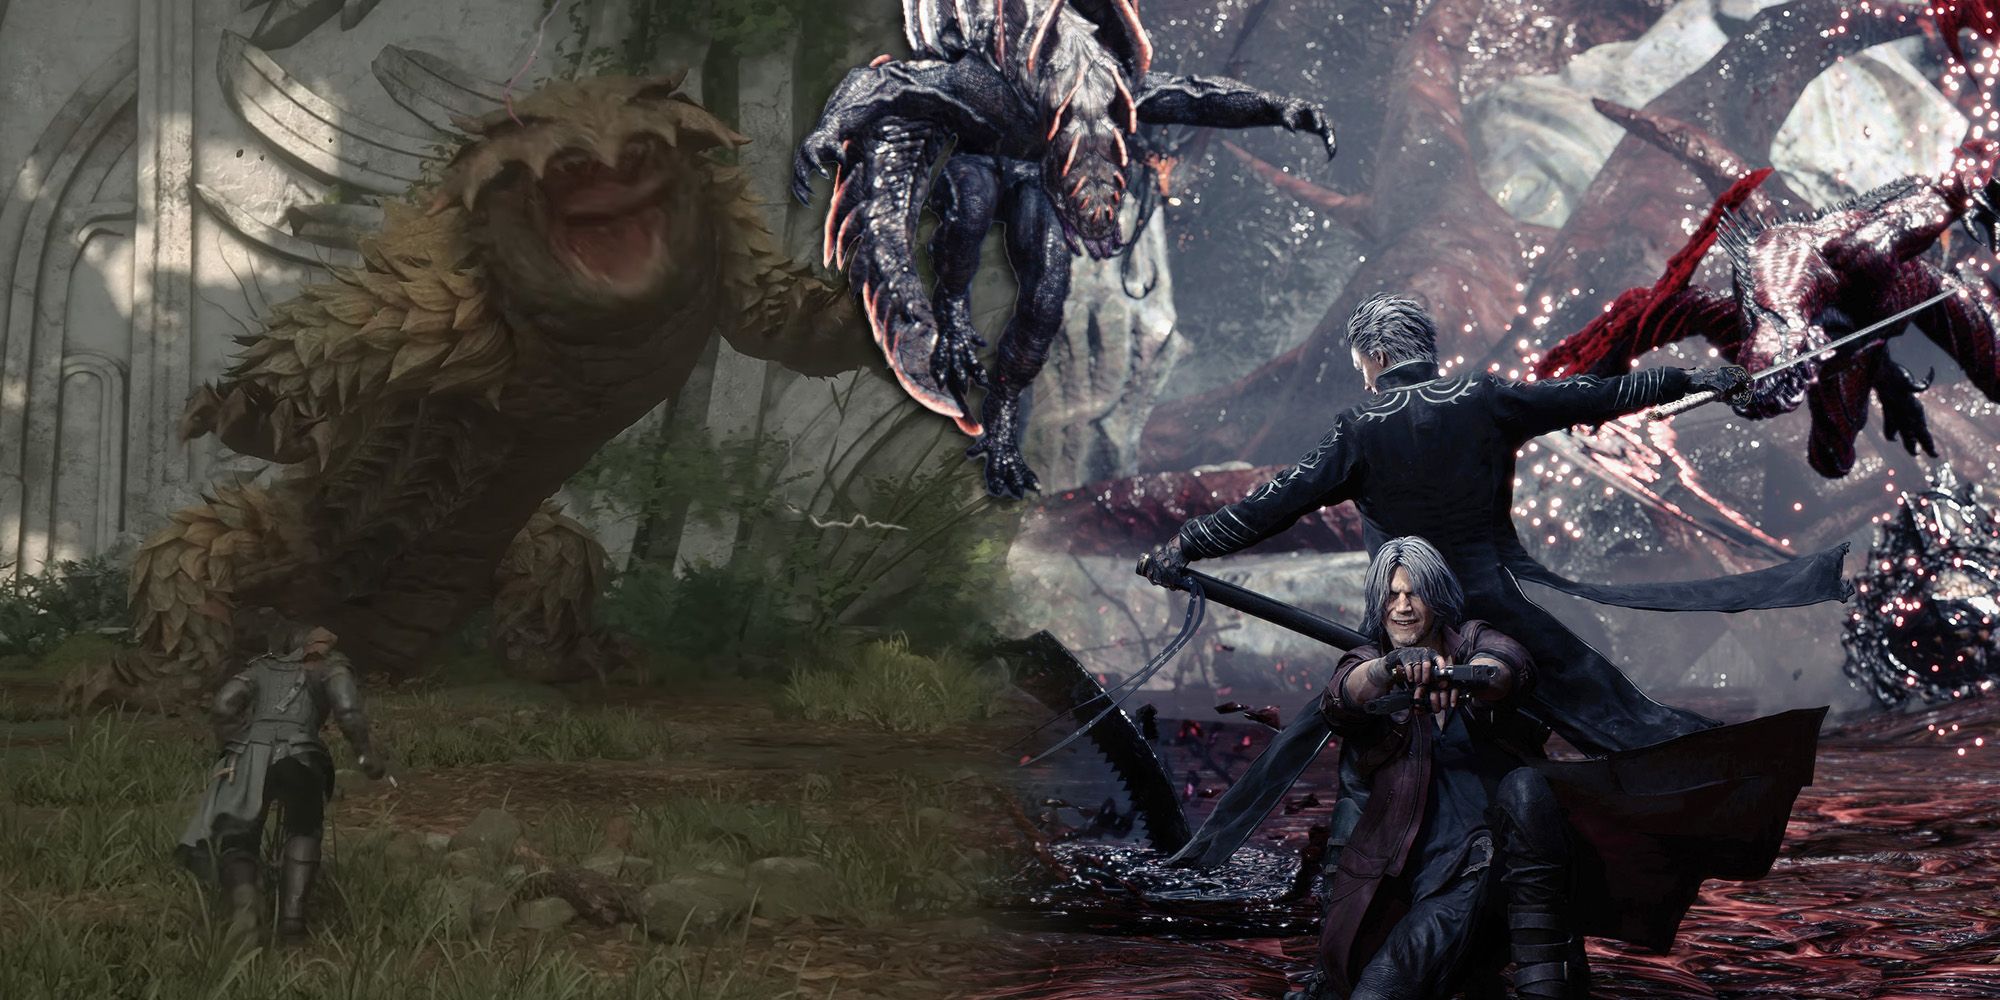 Final Fantasy 16 - Release Trailer Showing Clive Up Against Giant Lizard Next To Image of Dante and Vergil Fighting Together